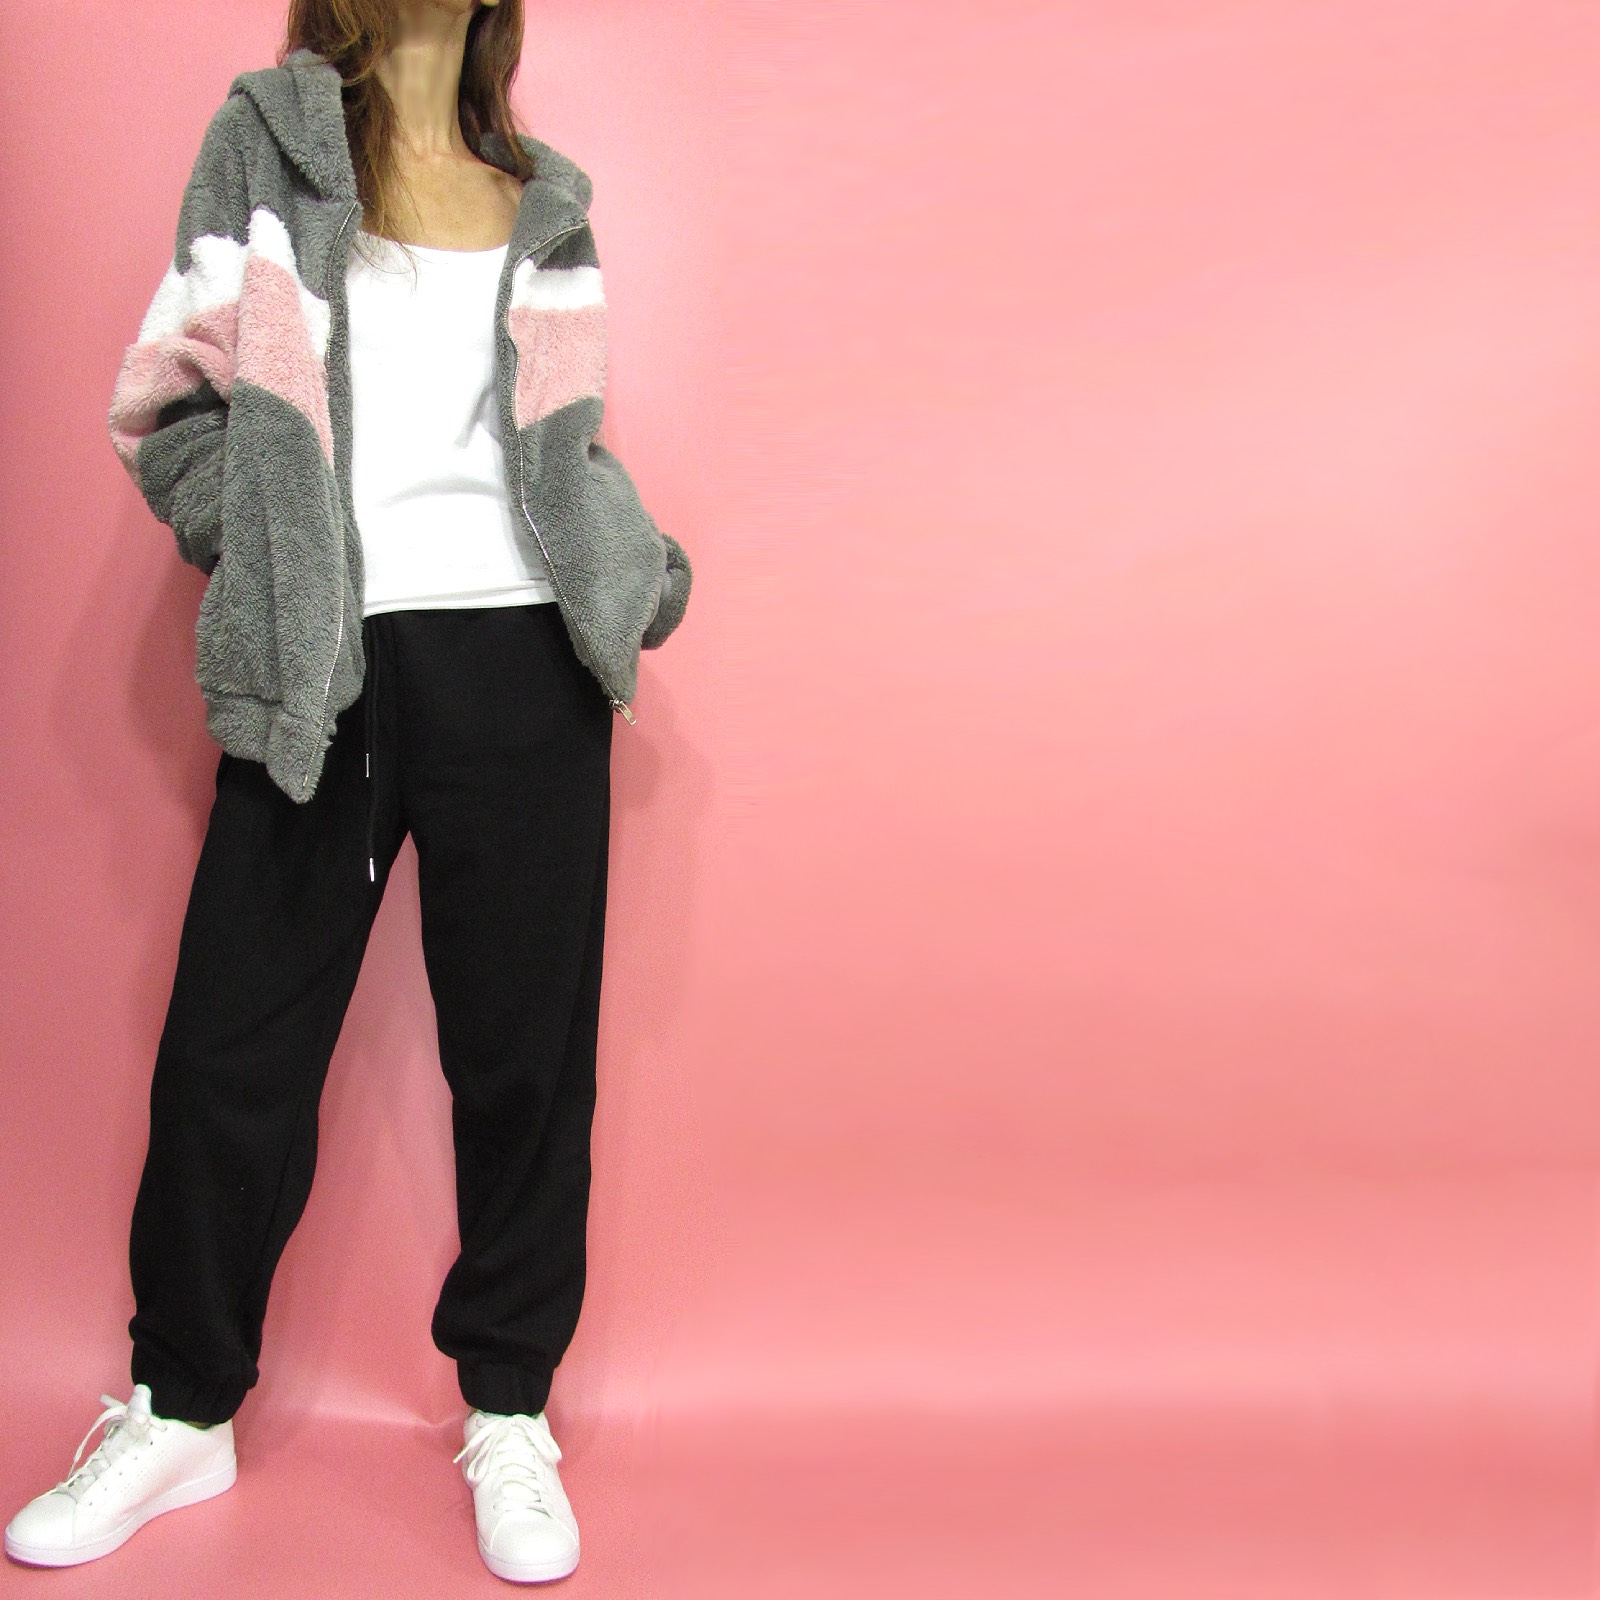 Coordinate2875/Outer103 & Tops824 & Pants261